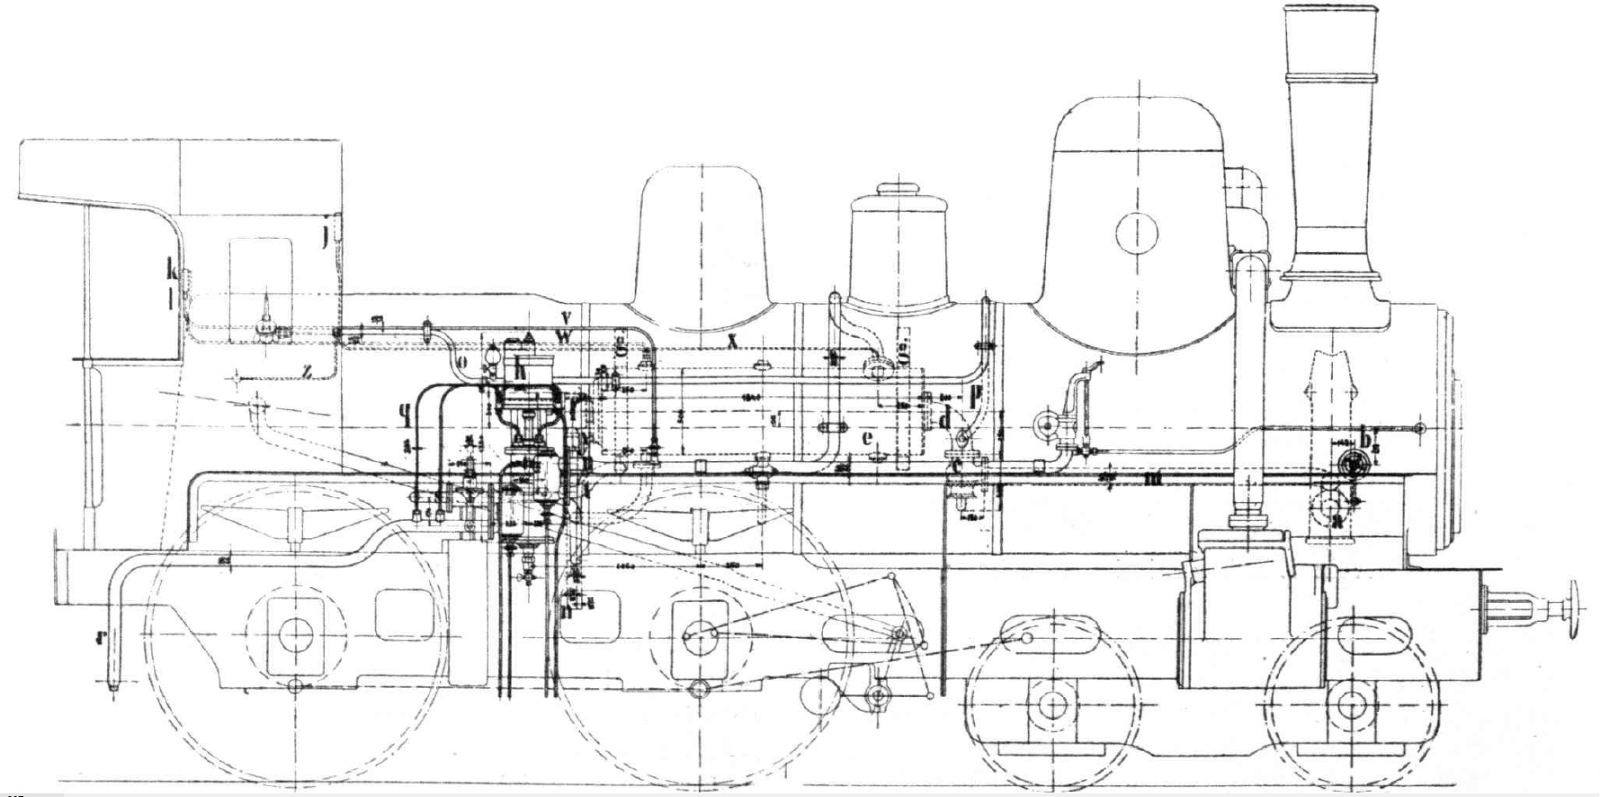 Schematic drawing of the 17c